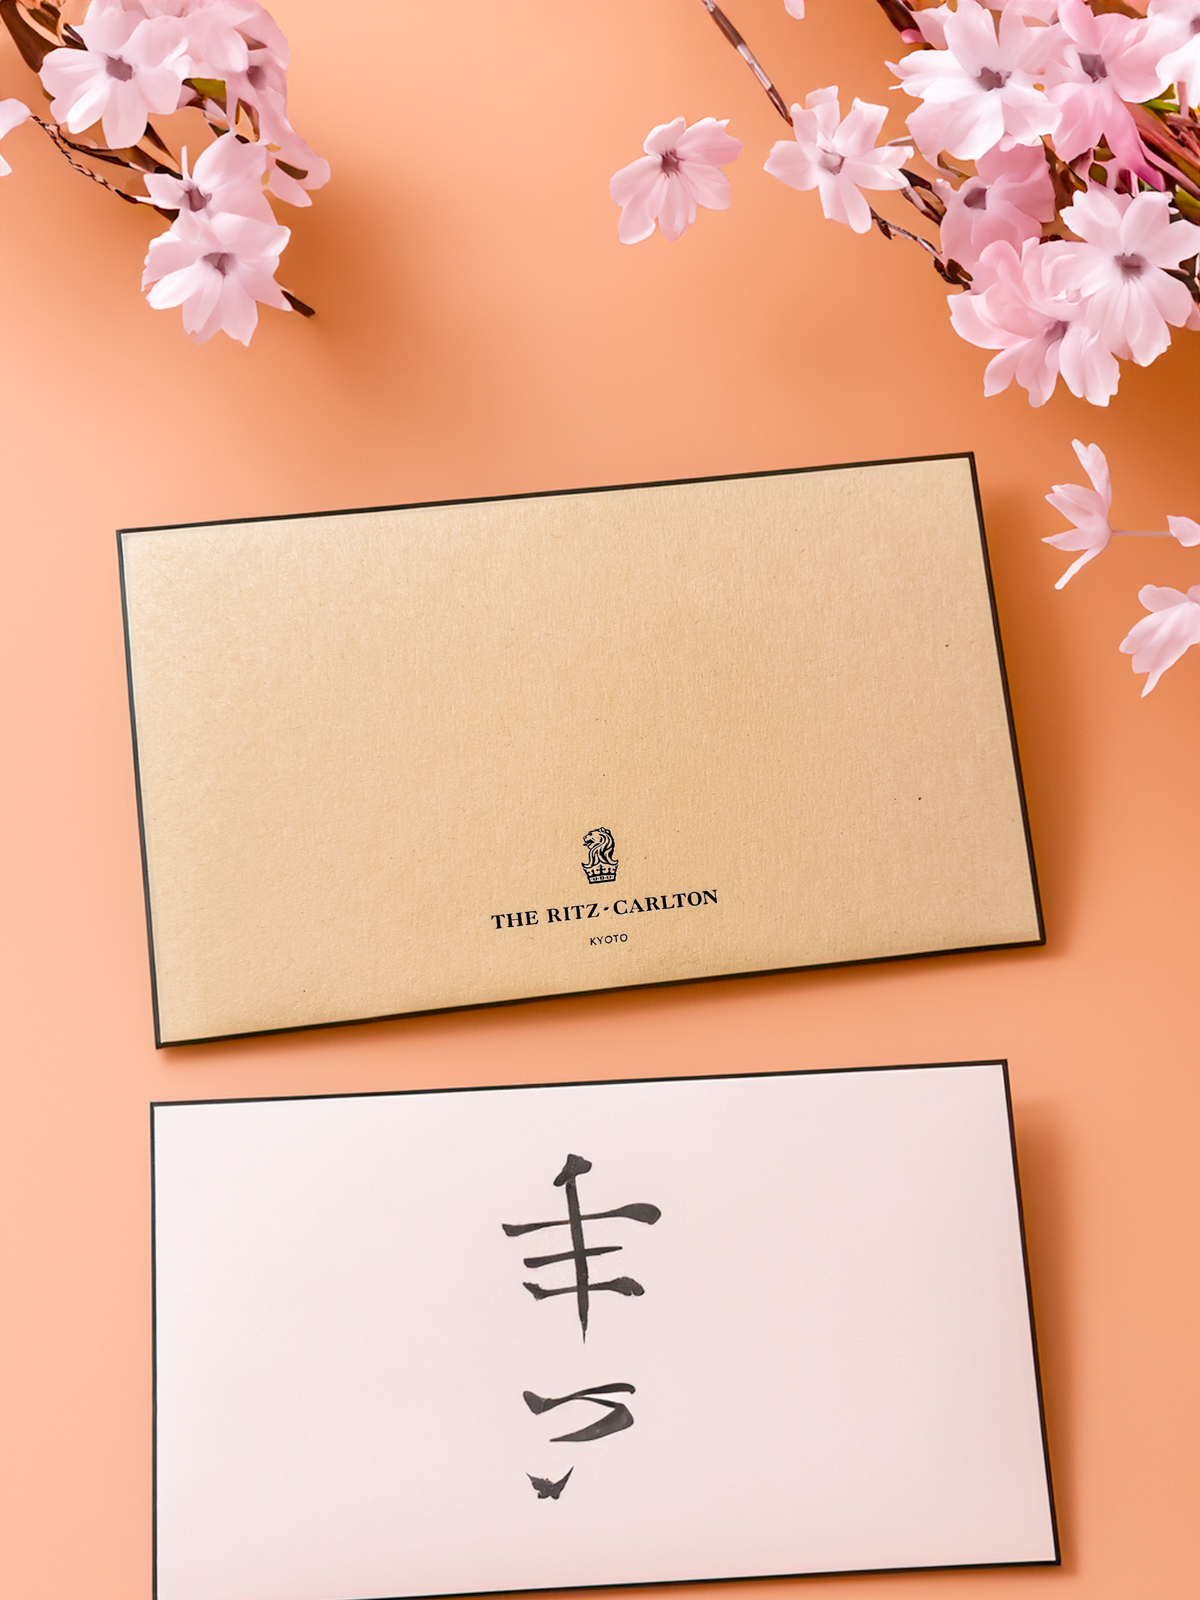 Wooden Ritz Carlton Kyoto branded picture frame with Japanese calligraphy on the bottom flanked with sakura flowers over an orange background.